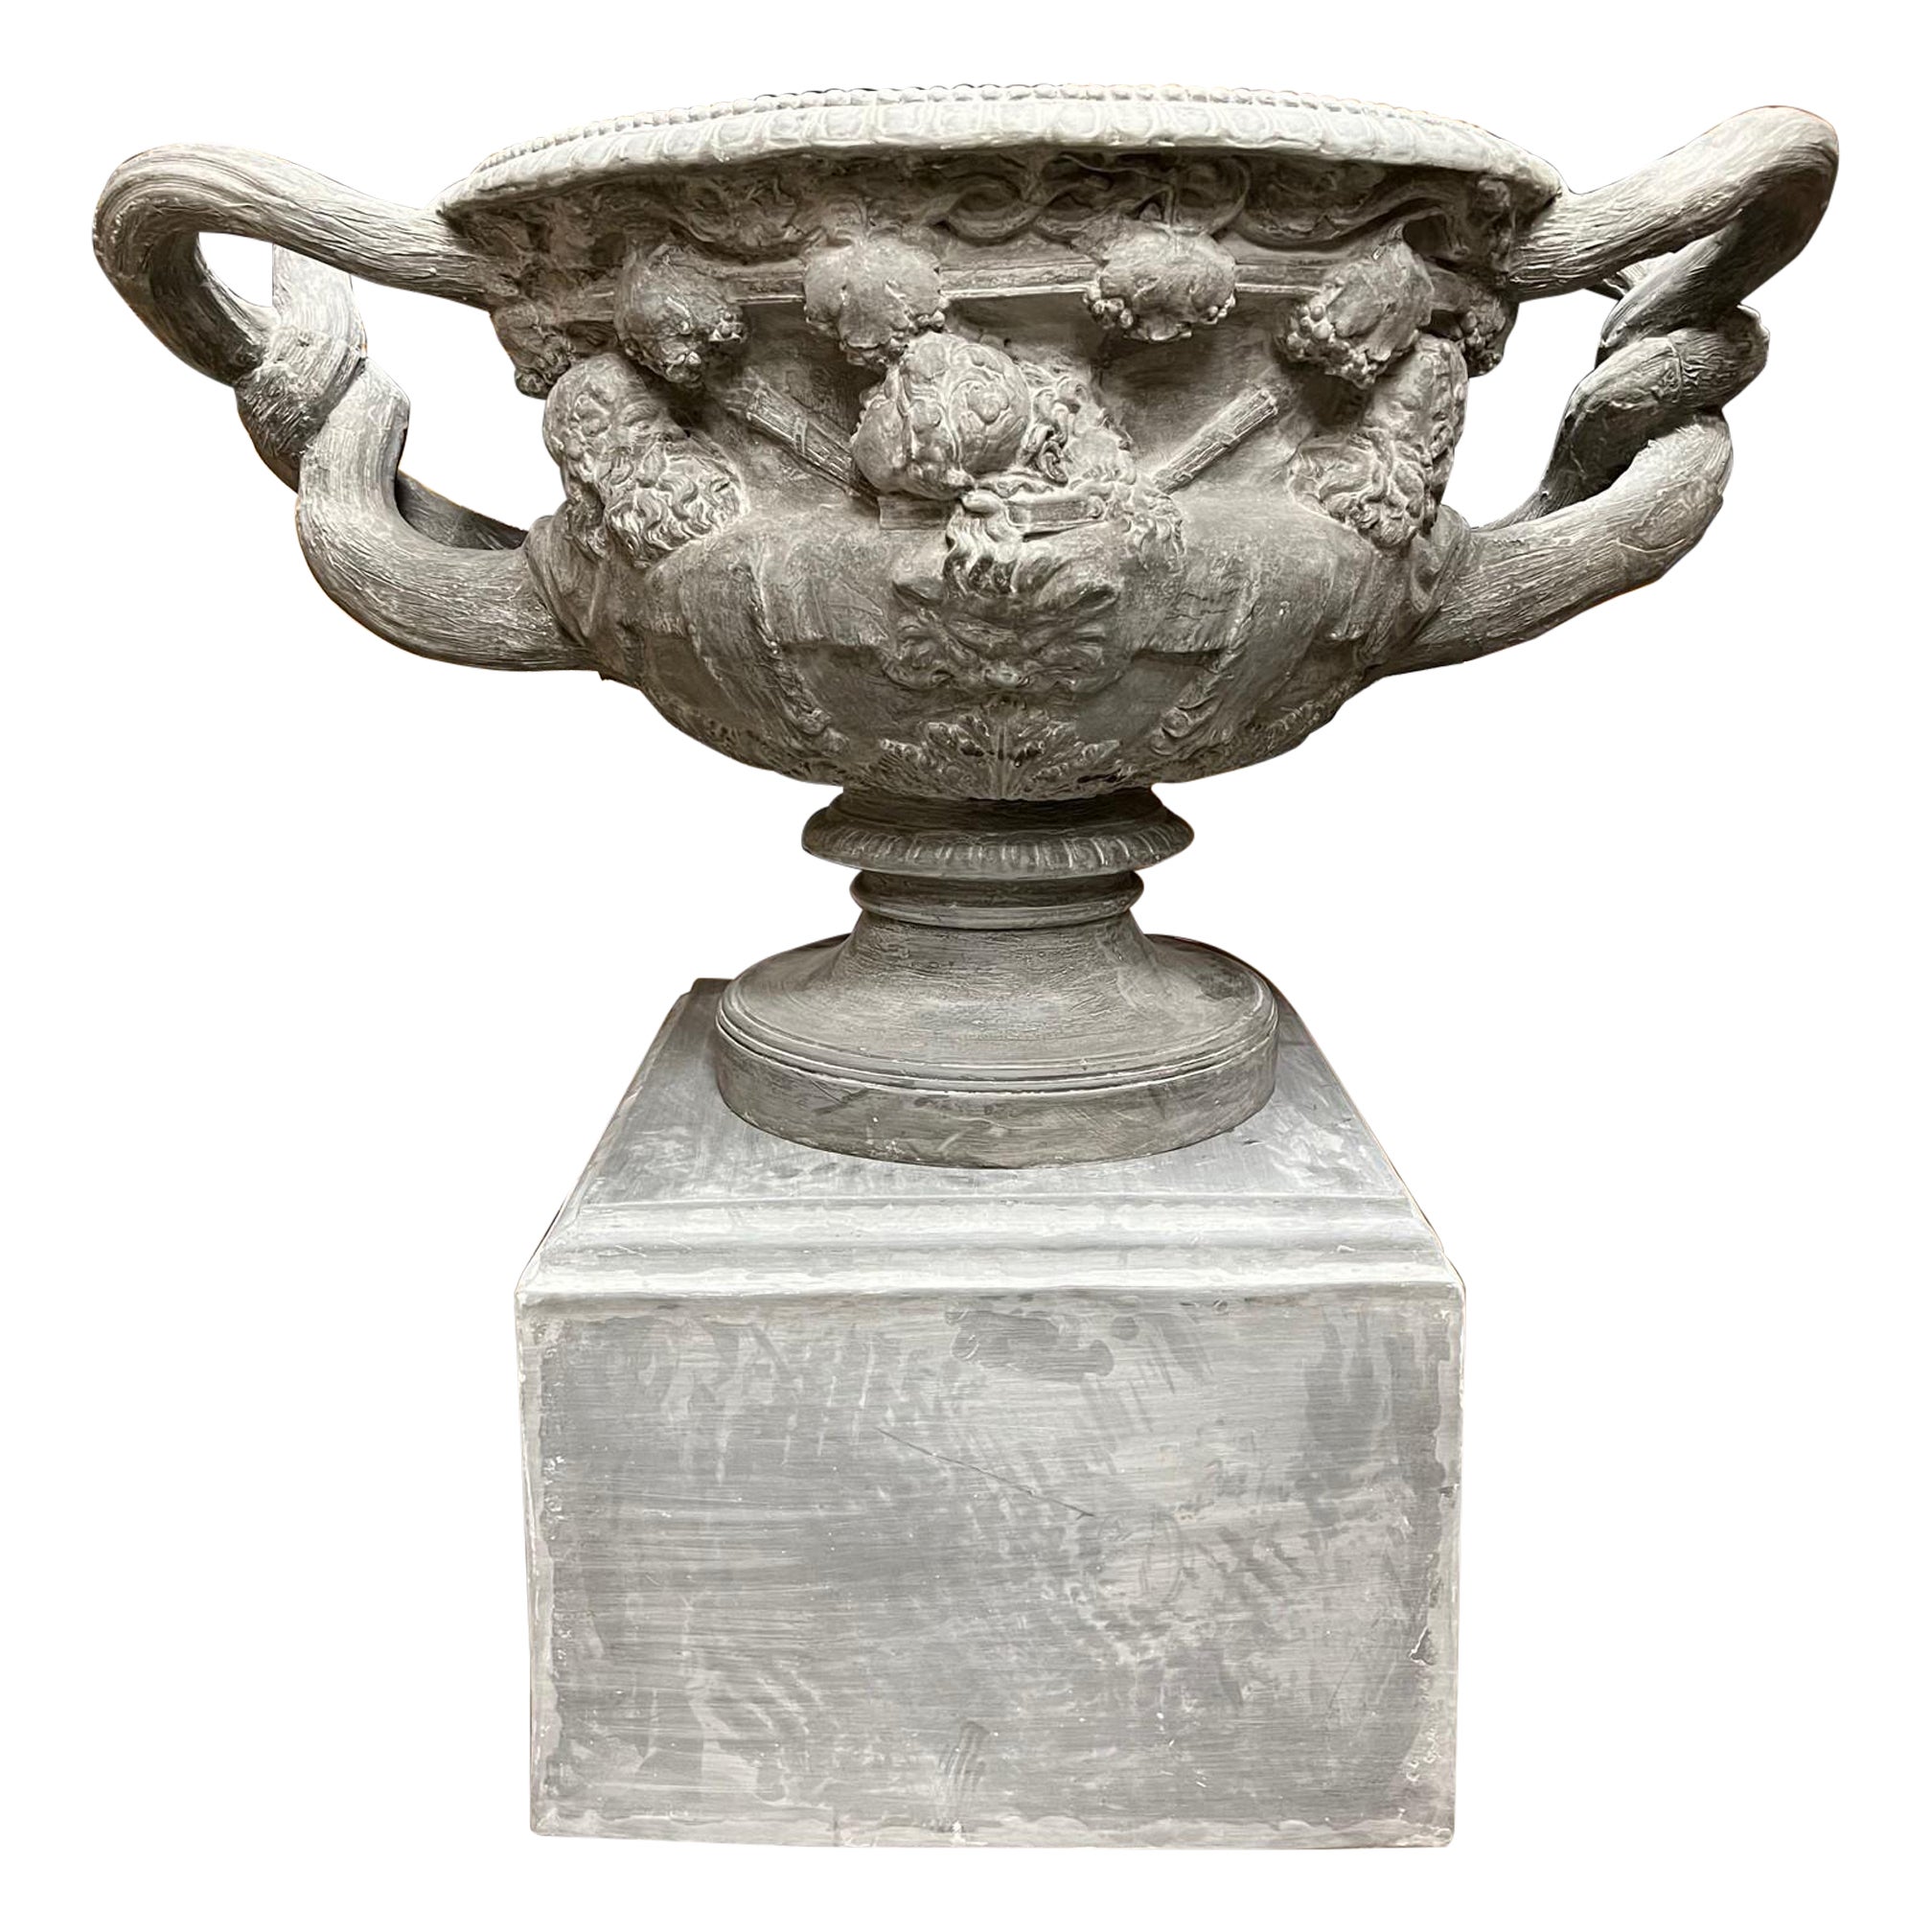 Monumental Reproduction Fiberglass Urn with Large Handles on a Pedestal  For Sale